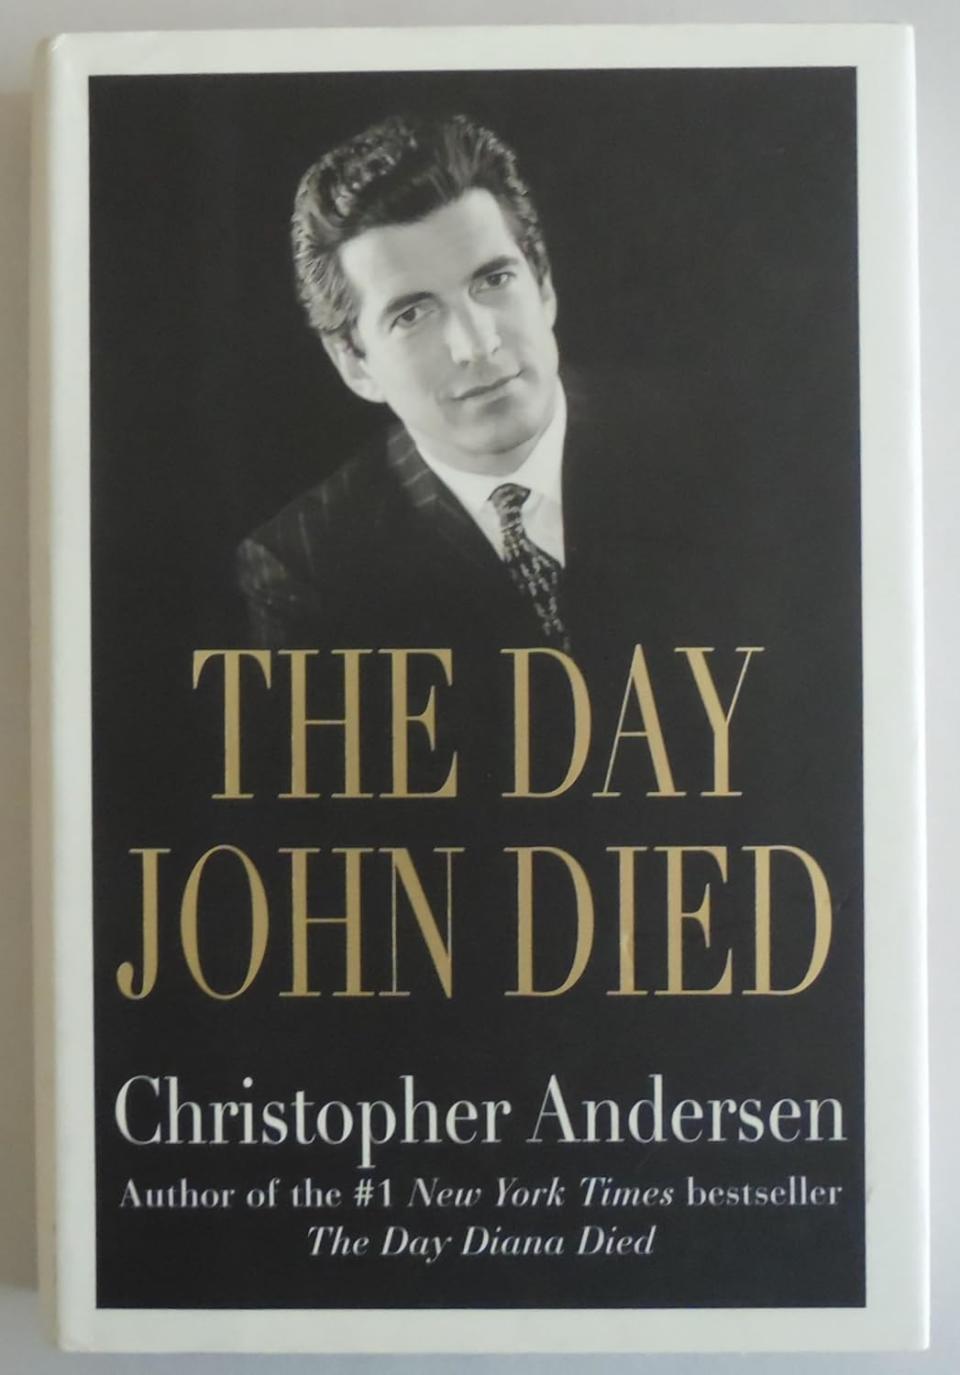 ‘The Day John Died’ by Christopher Anderson